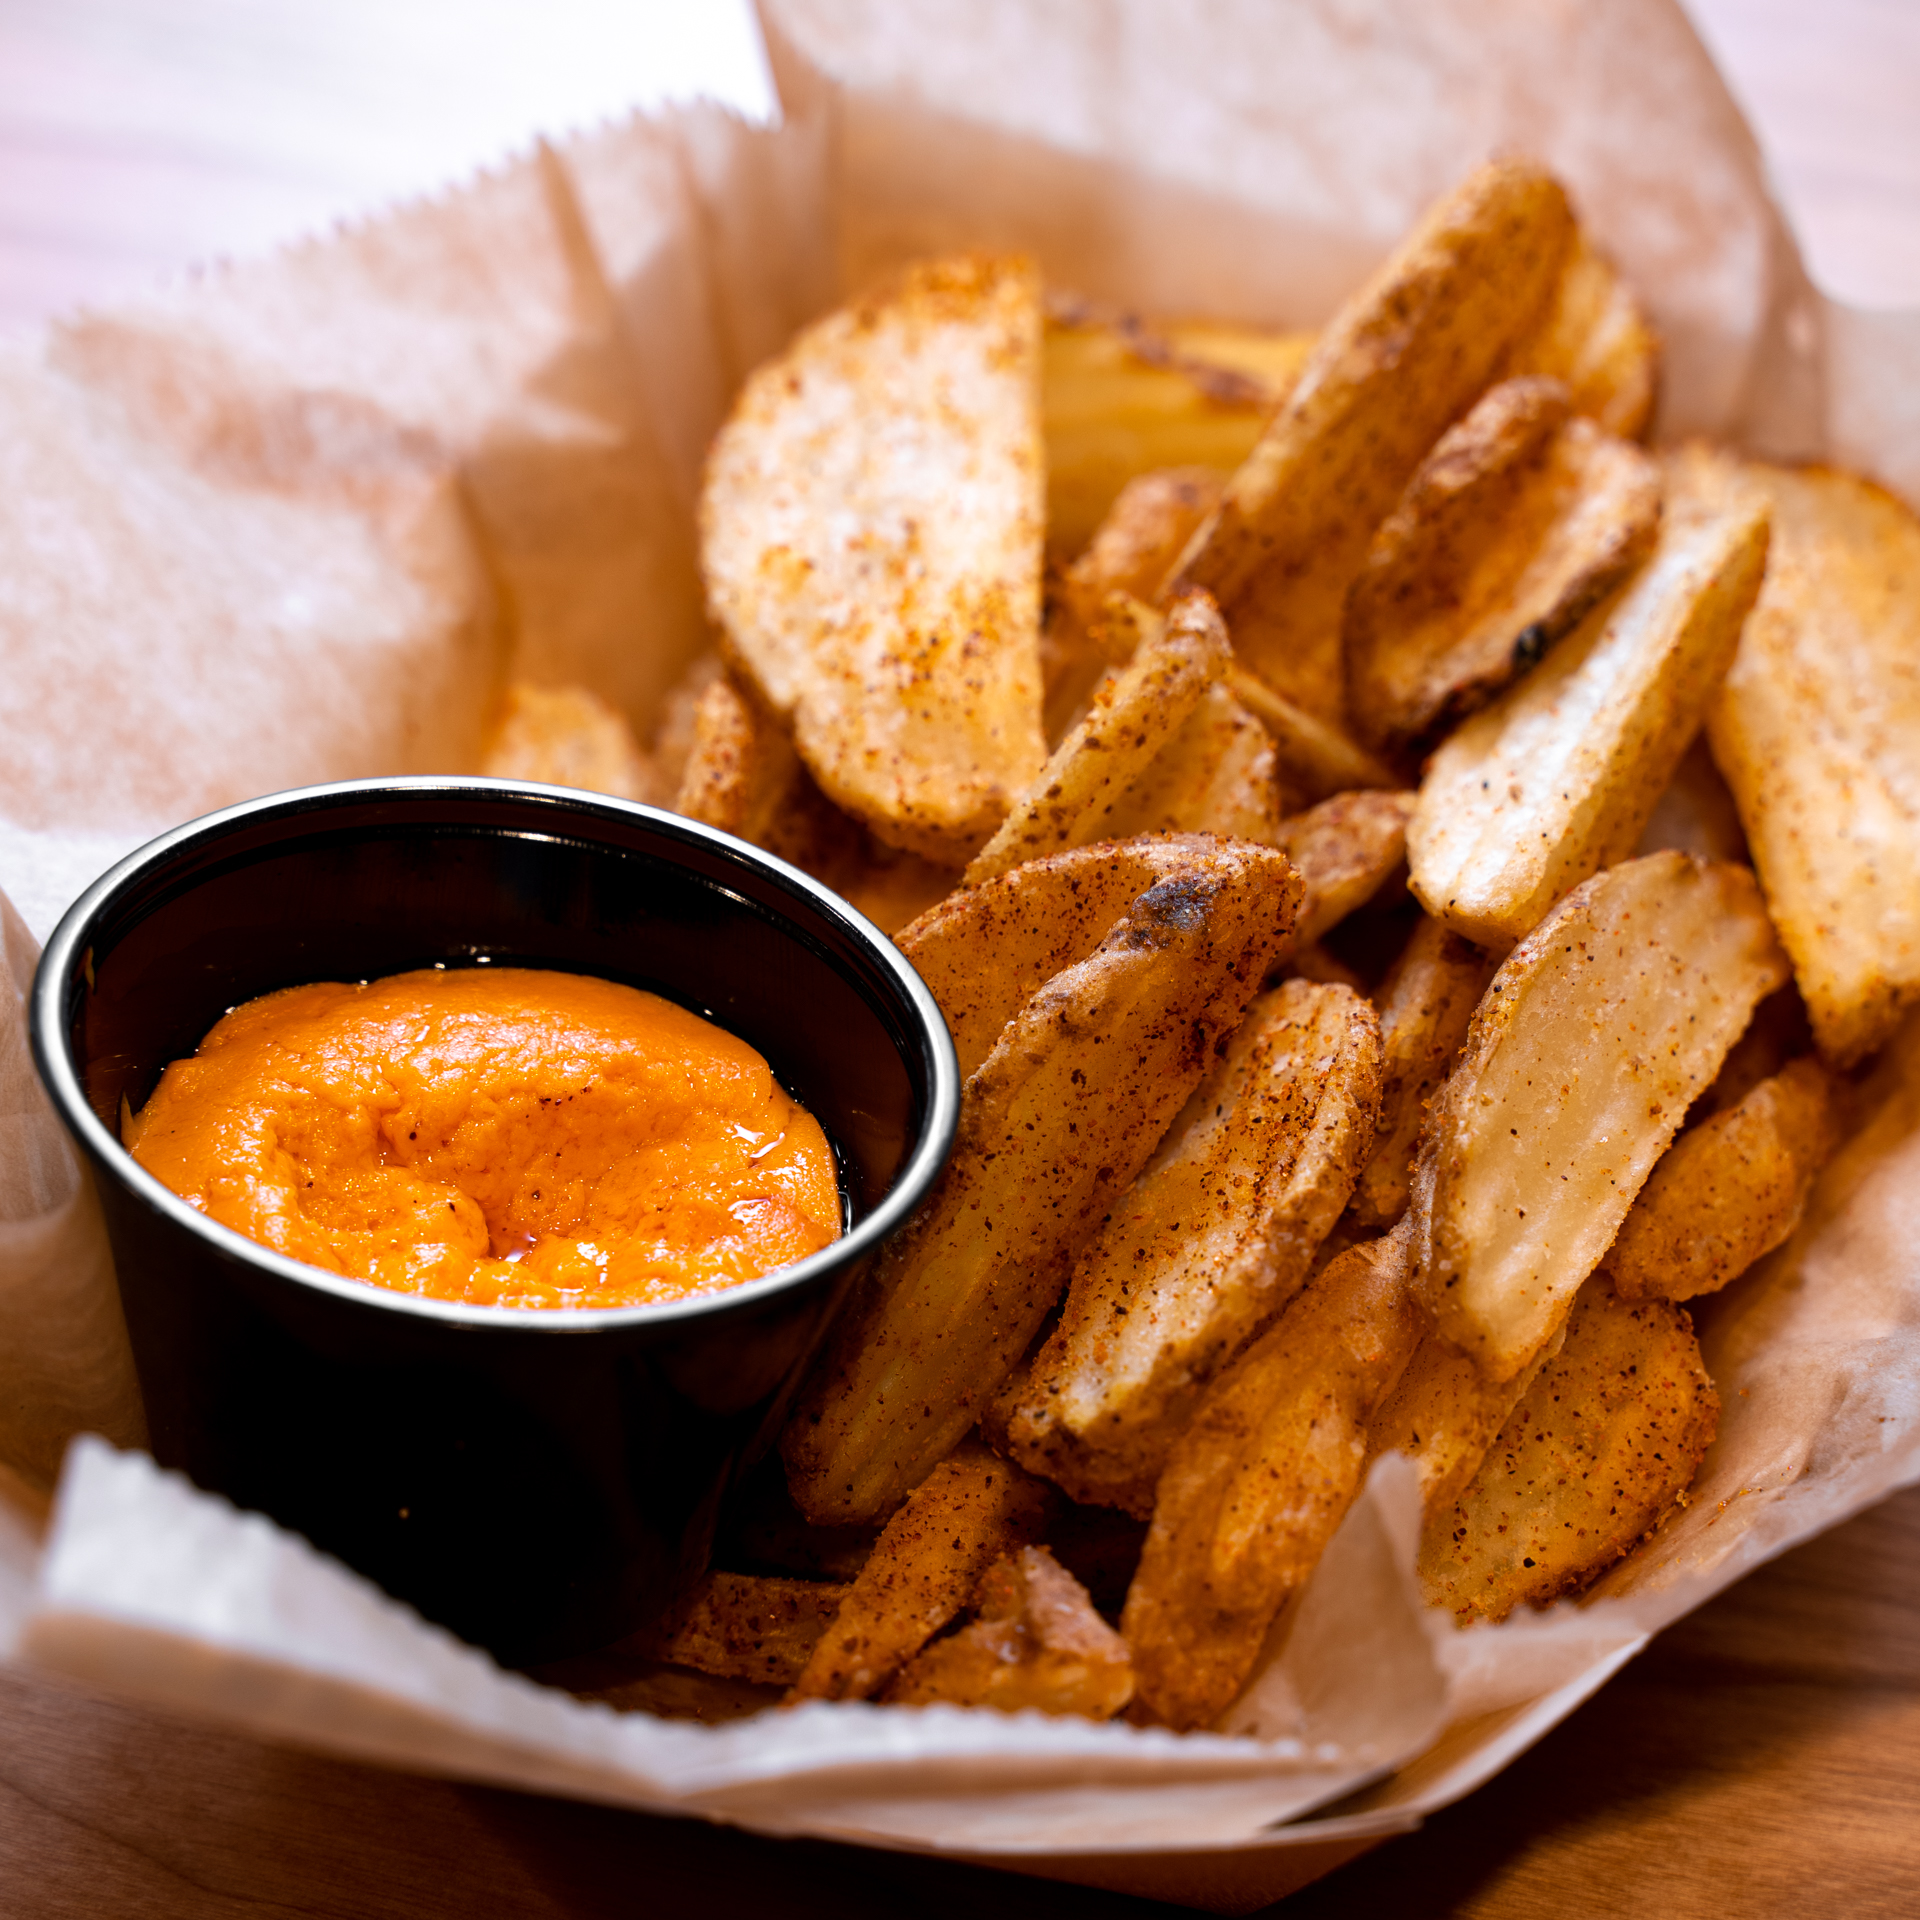  Fresh, Delicious Tavern Chips (Fries) are served at Lucky Louie’s Burgs and Weens at the Flagship City Food Hall in downtown Erie, PA